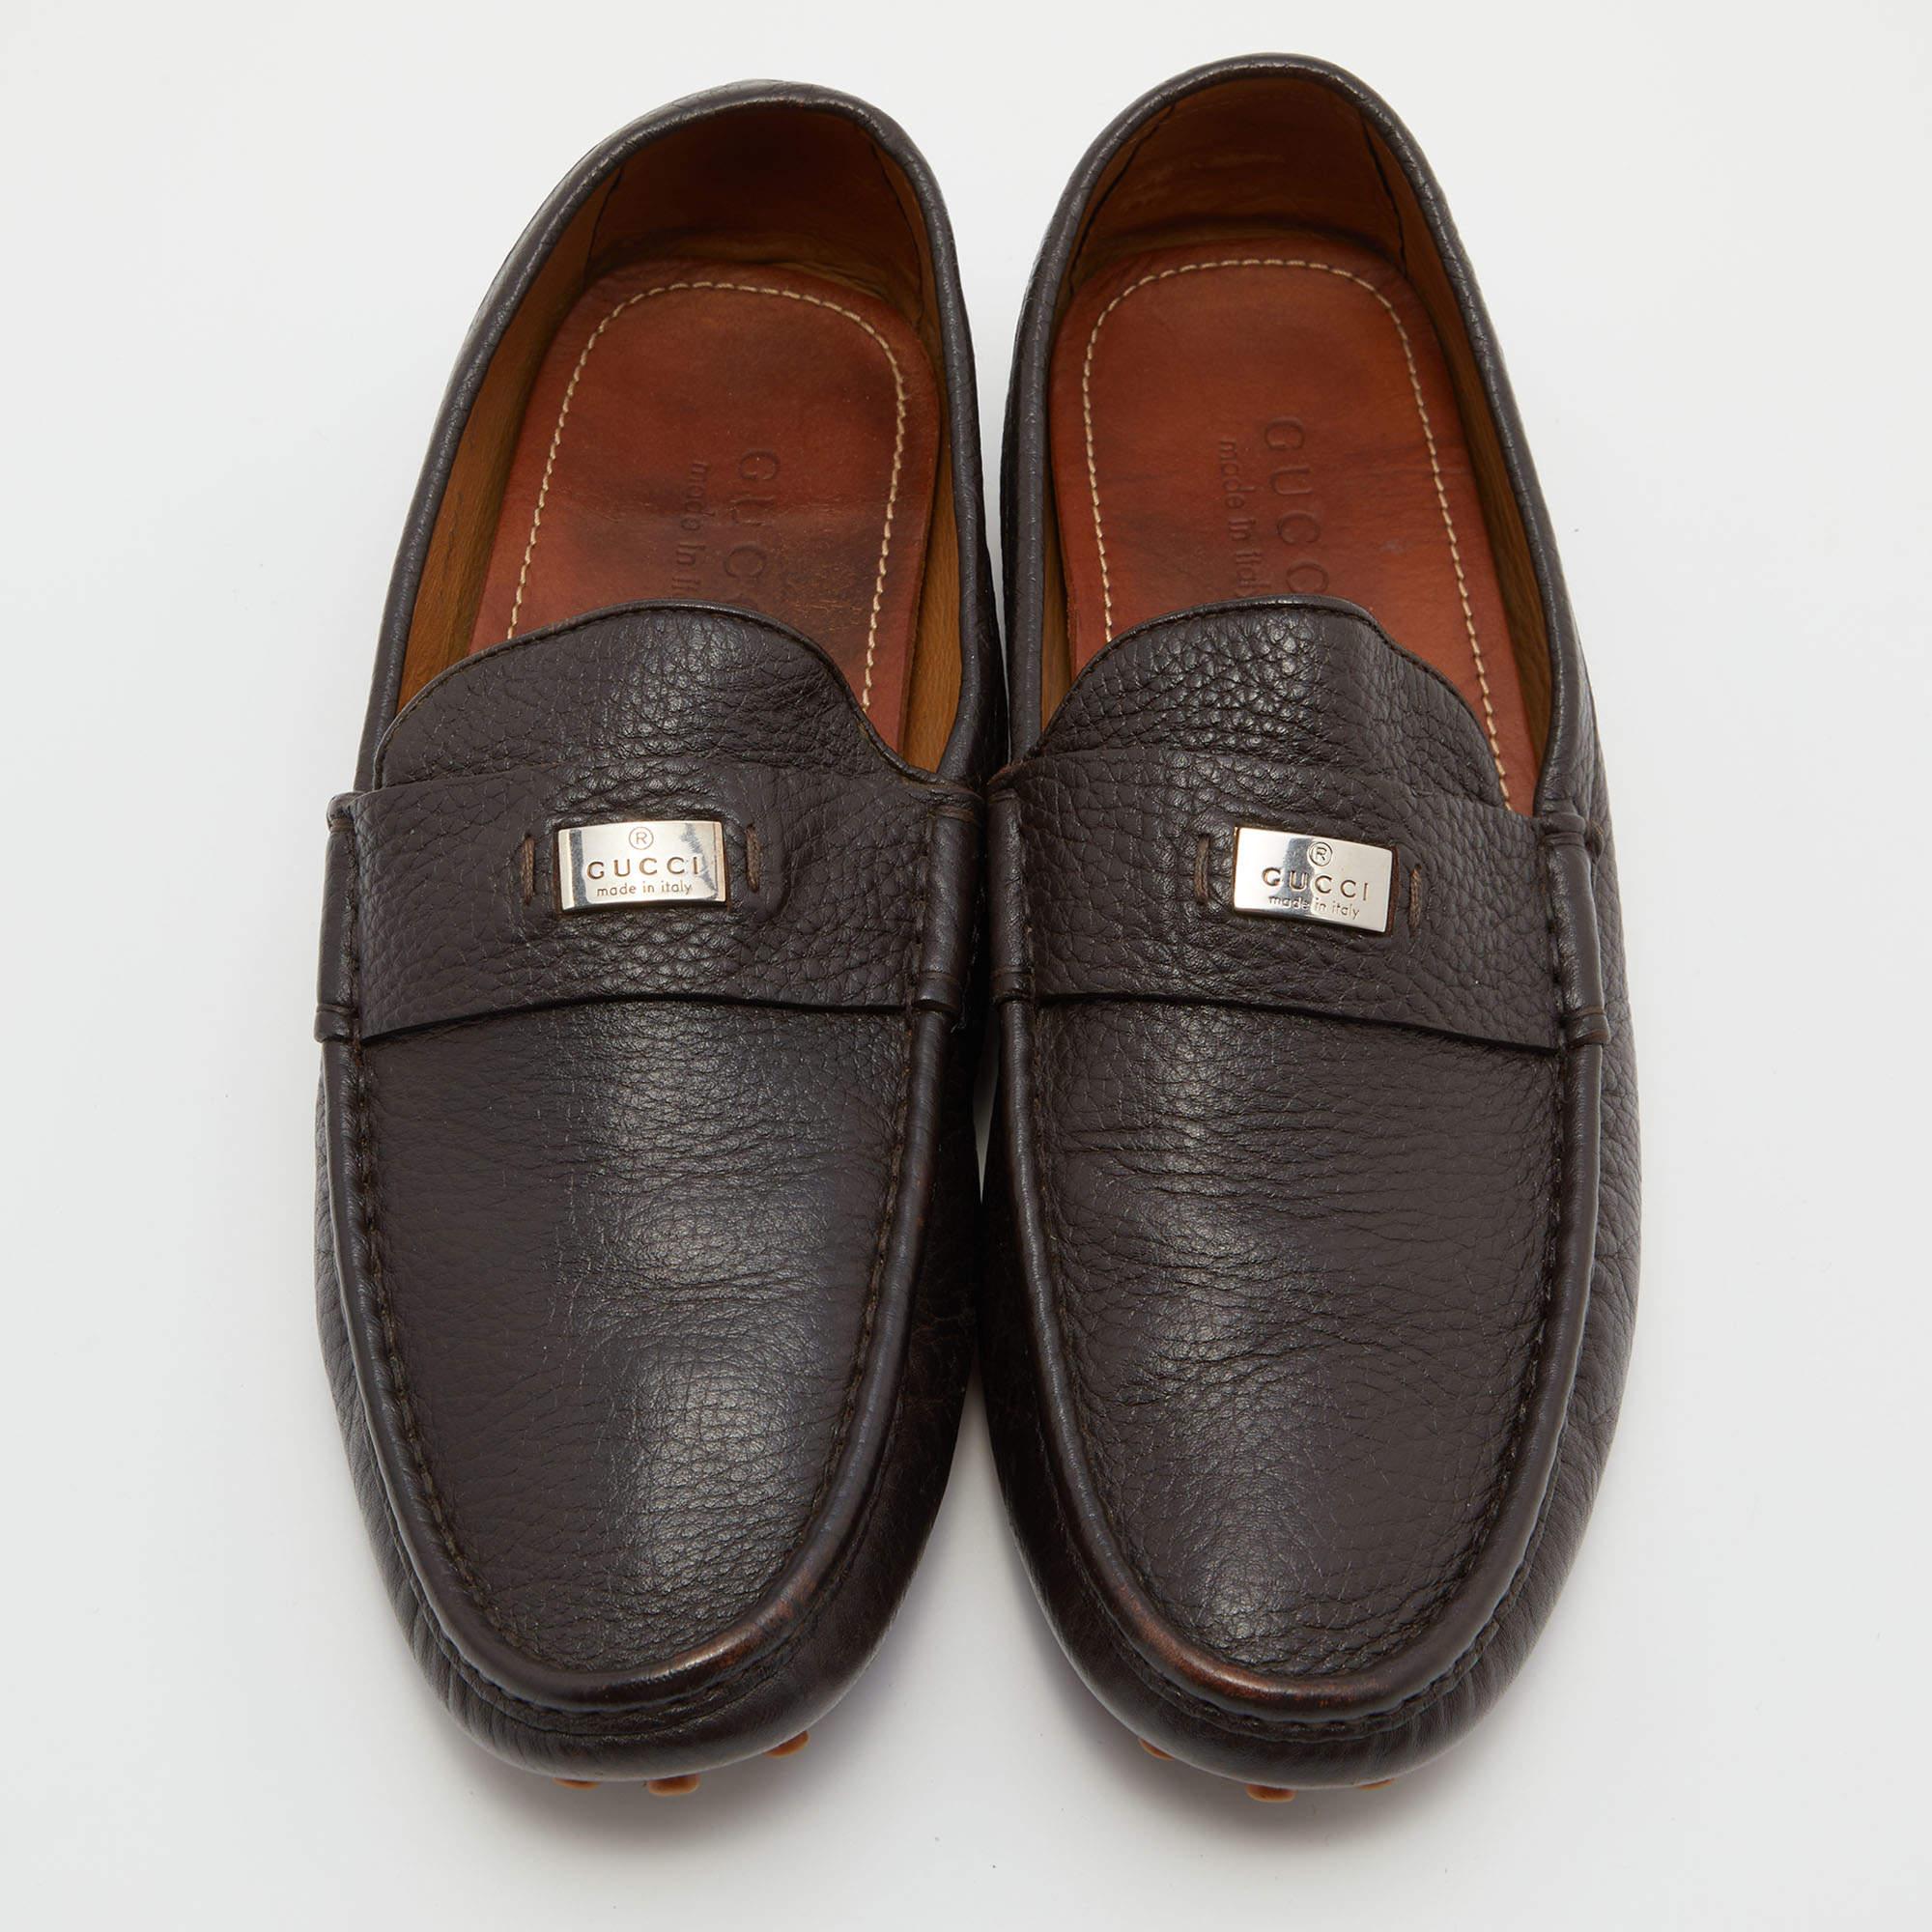 Highly fashionable and chic, these Gucci loafers will add an extra edge to your outfit. They are made from leather with a slip-on fitting, durable soles, and comfortable footbeds.

